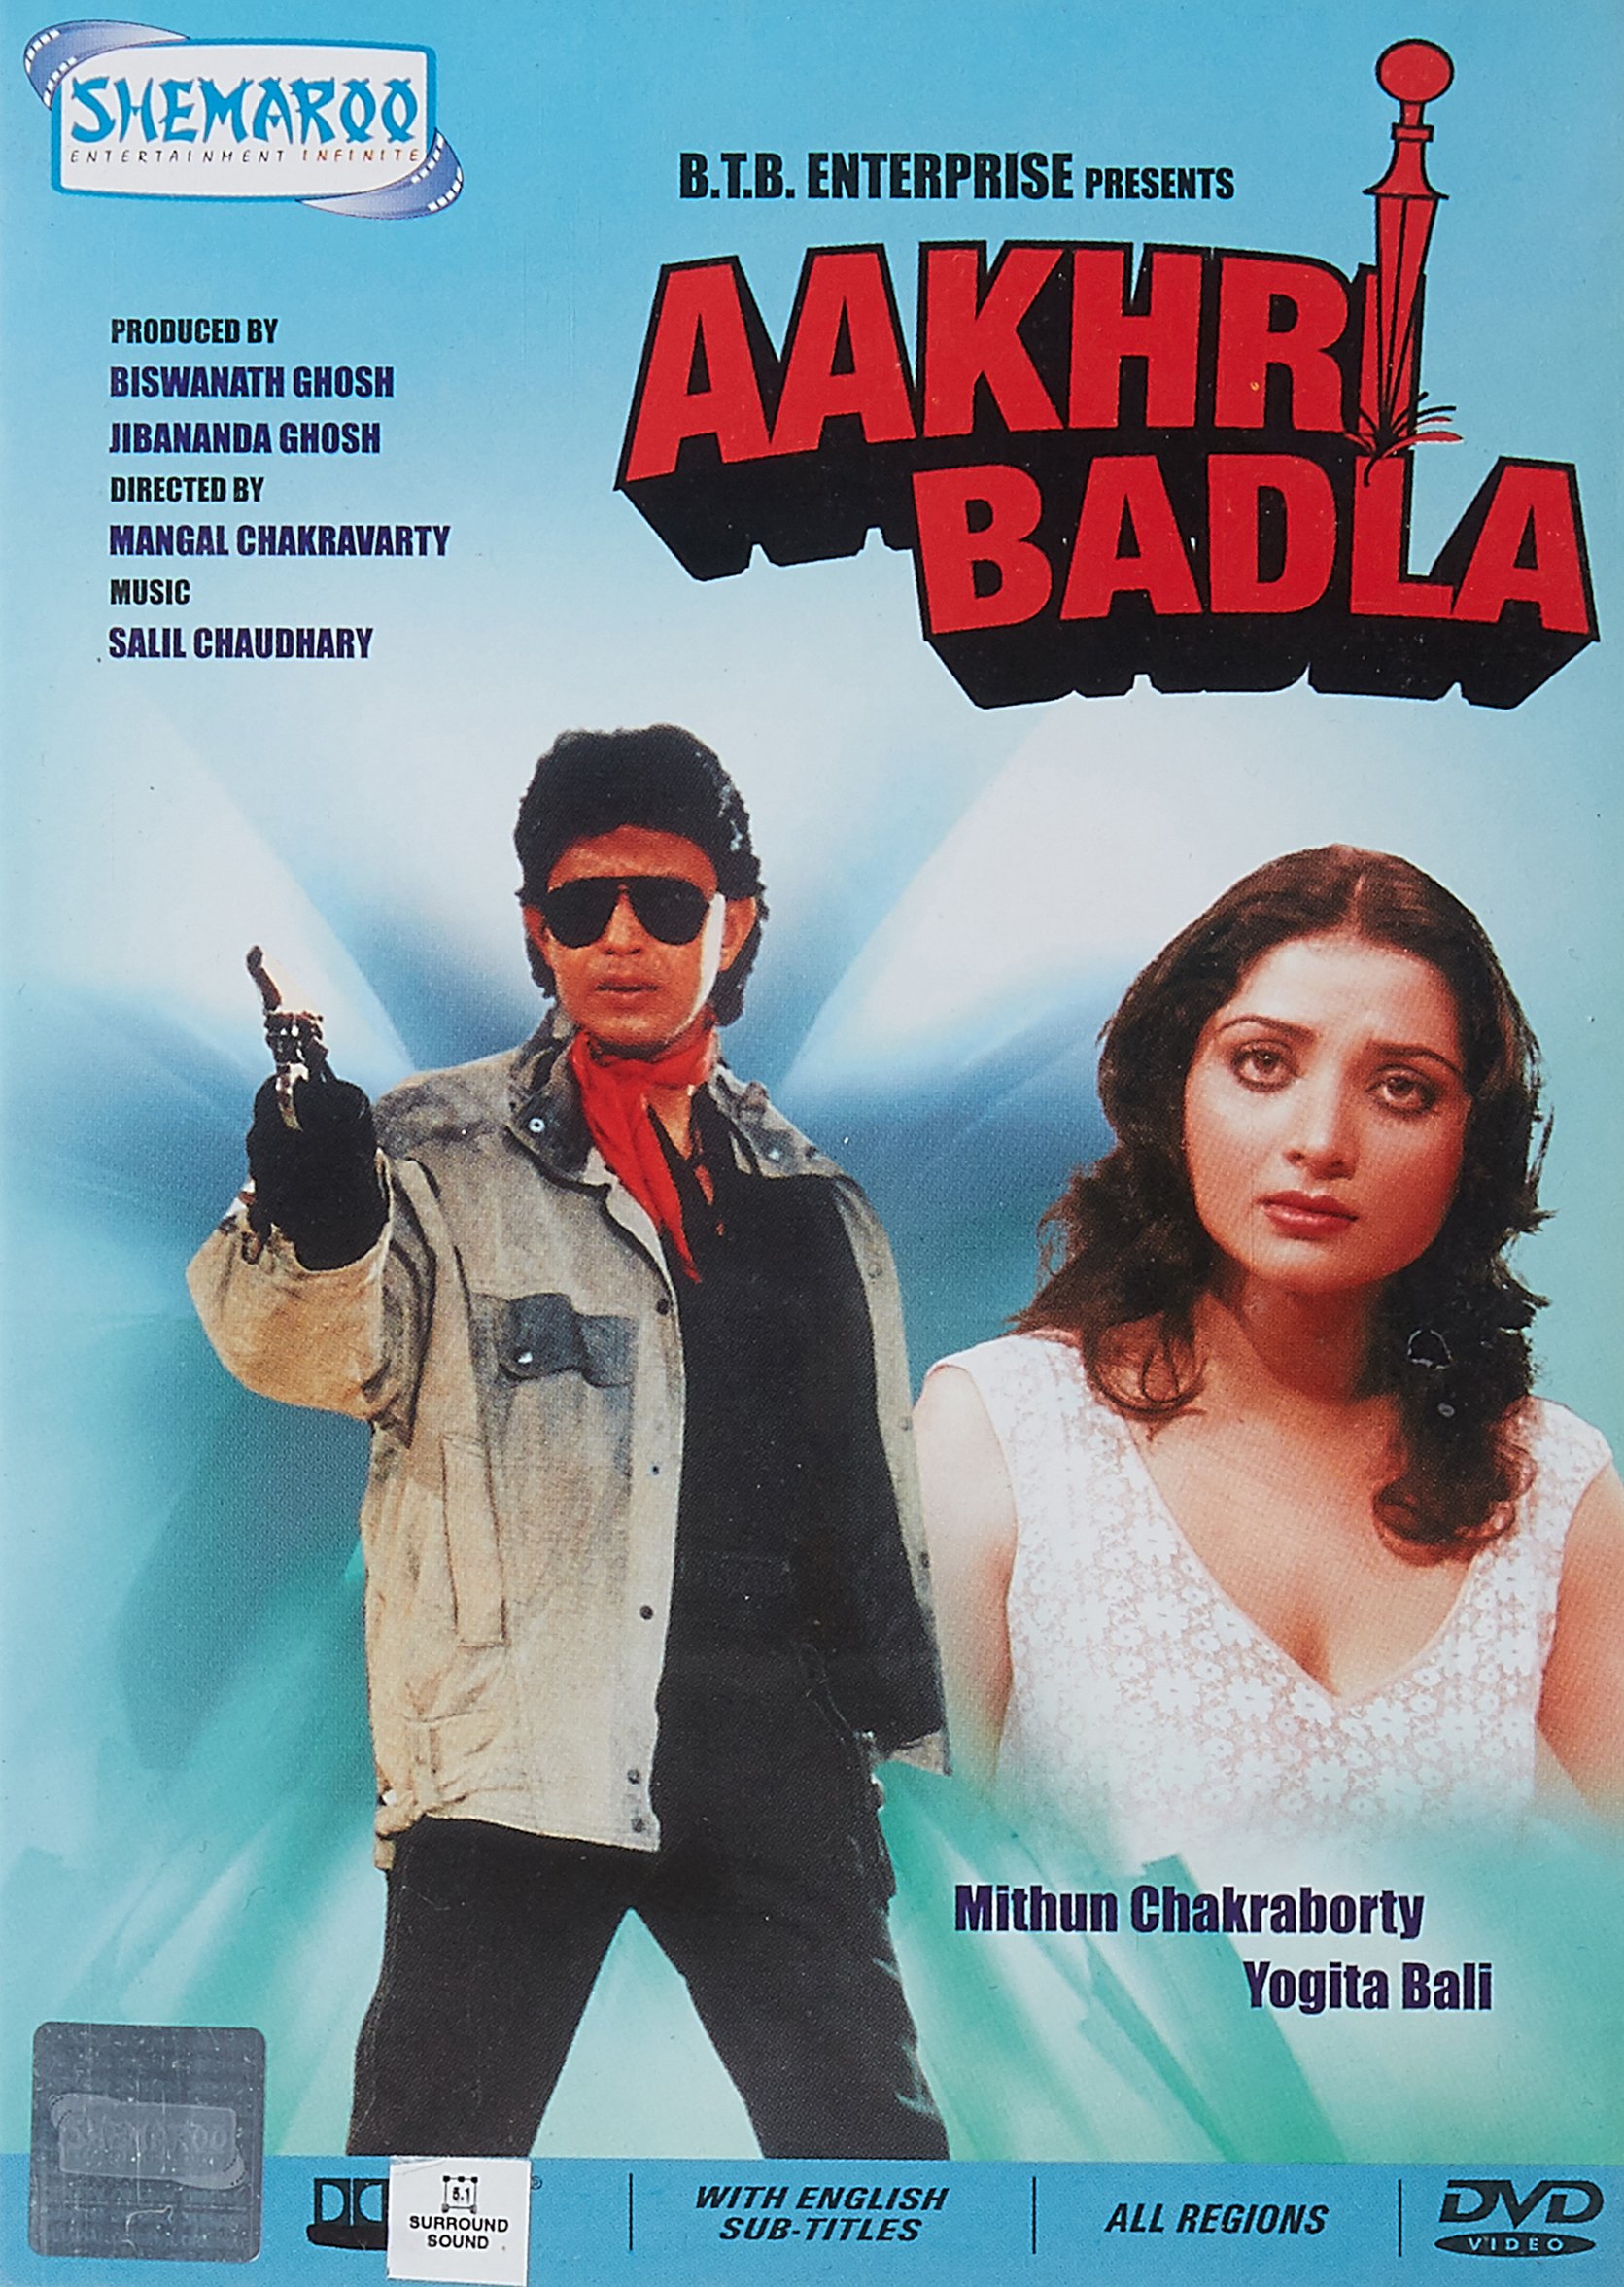 aakhri-badla-movie-purchase-or-watch-online